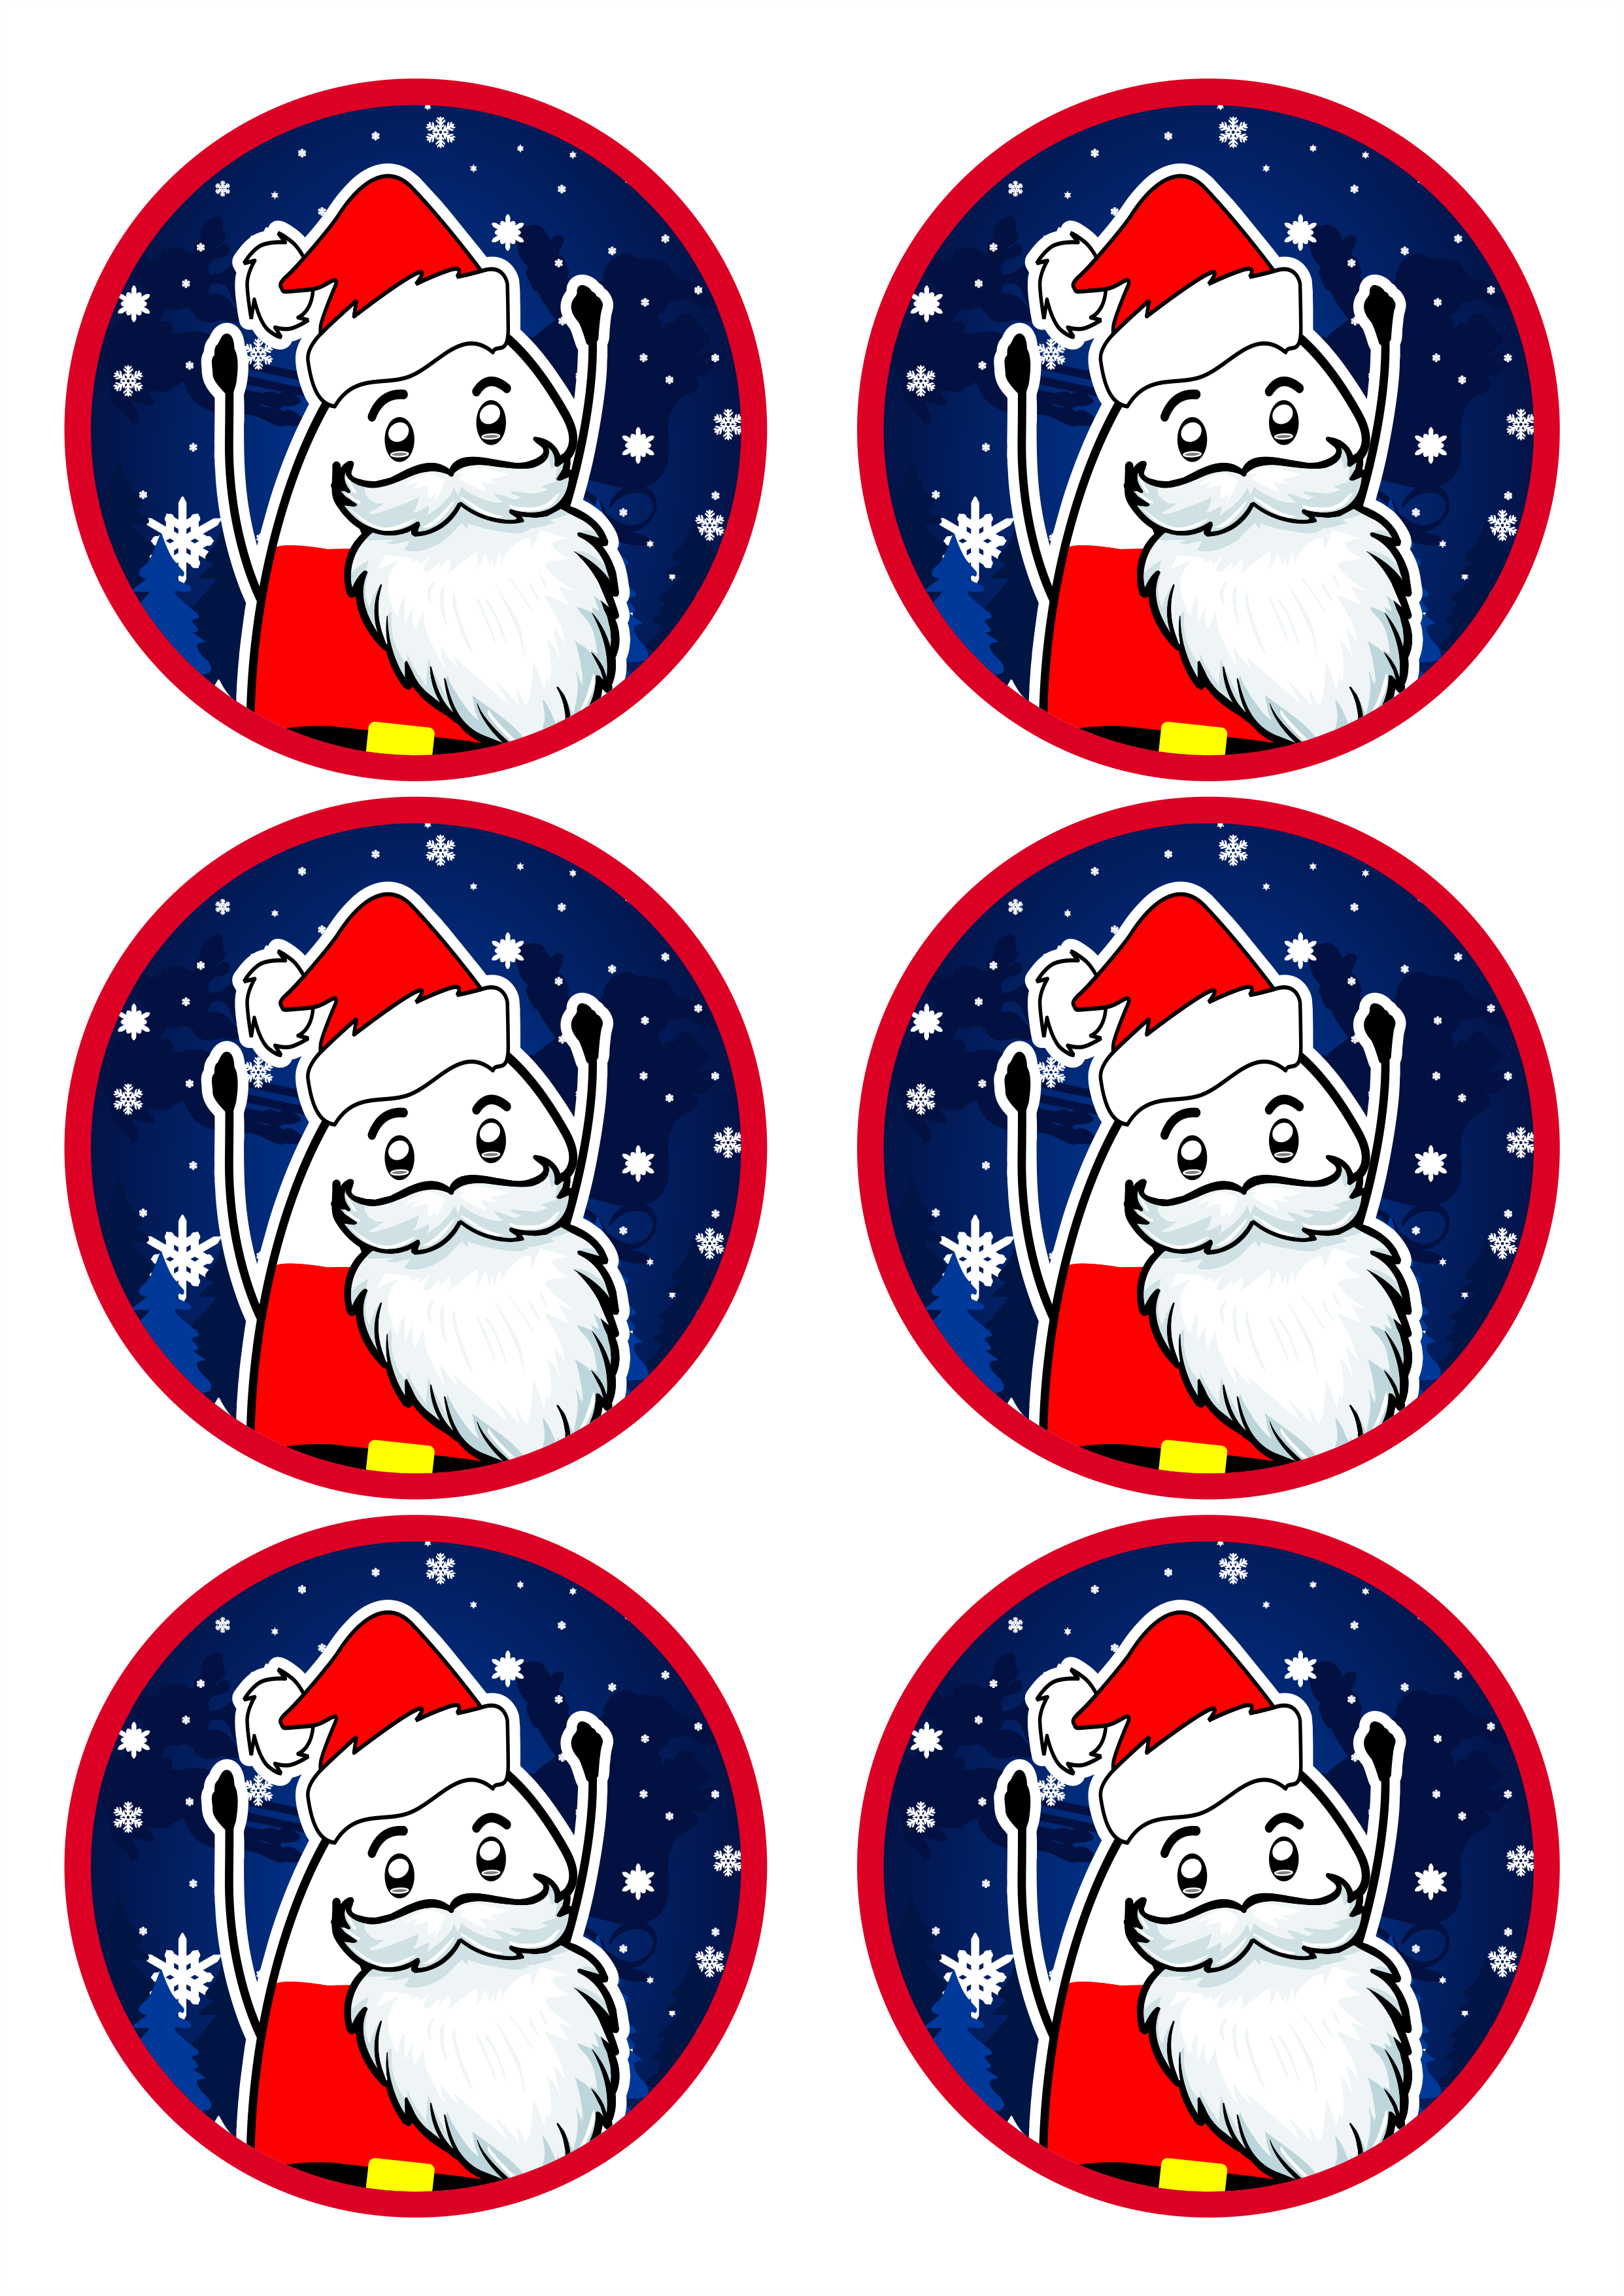 Flork of cows papai noel adesivos stickers tags 6 unidades png